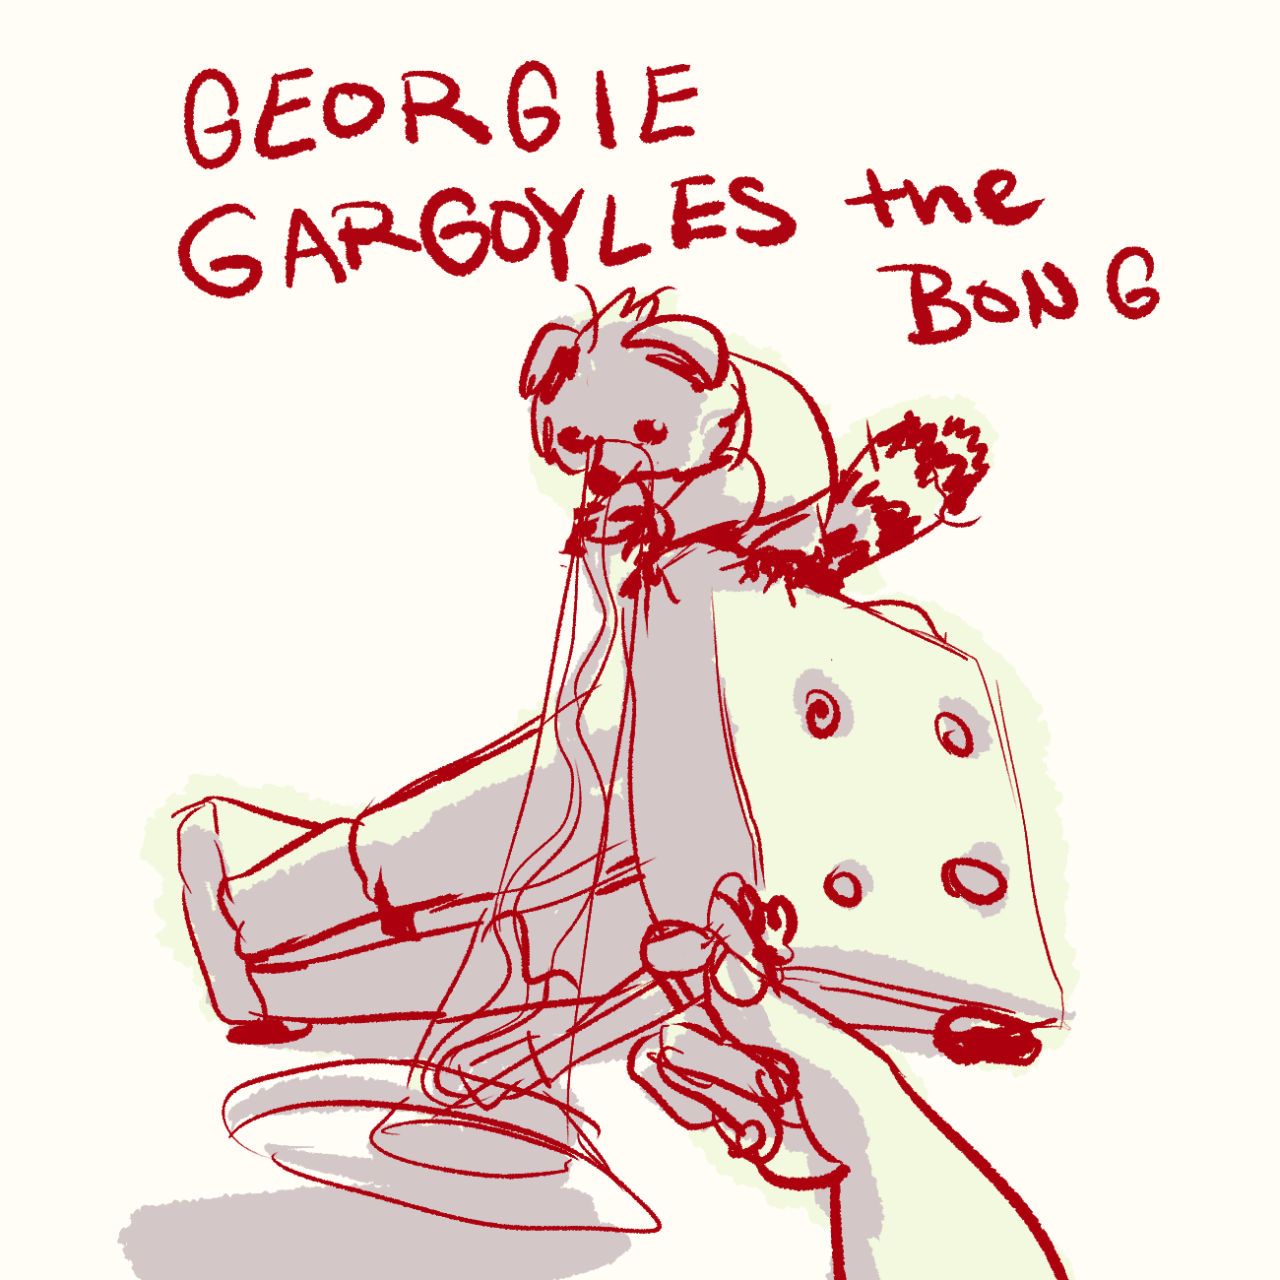 a raccoon wearing a collar and an overly large tshirt stands on an arm rest with a long-necked bong posed against her mouth. the text at the top says georgie gargoyles the bong